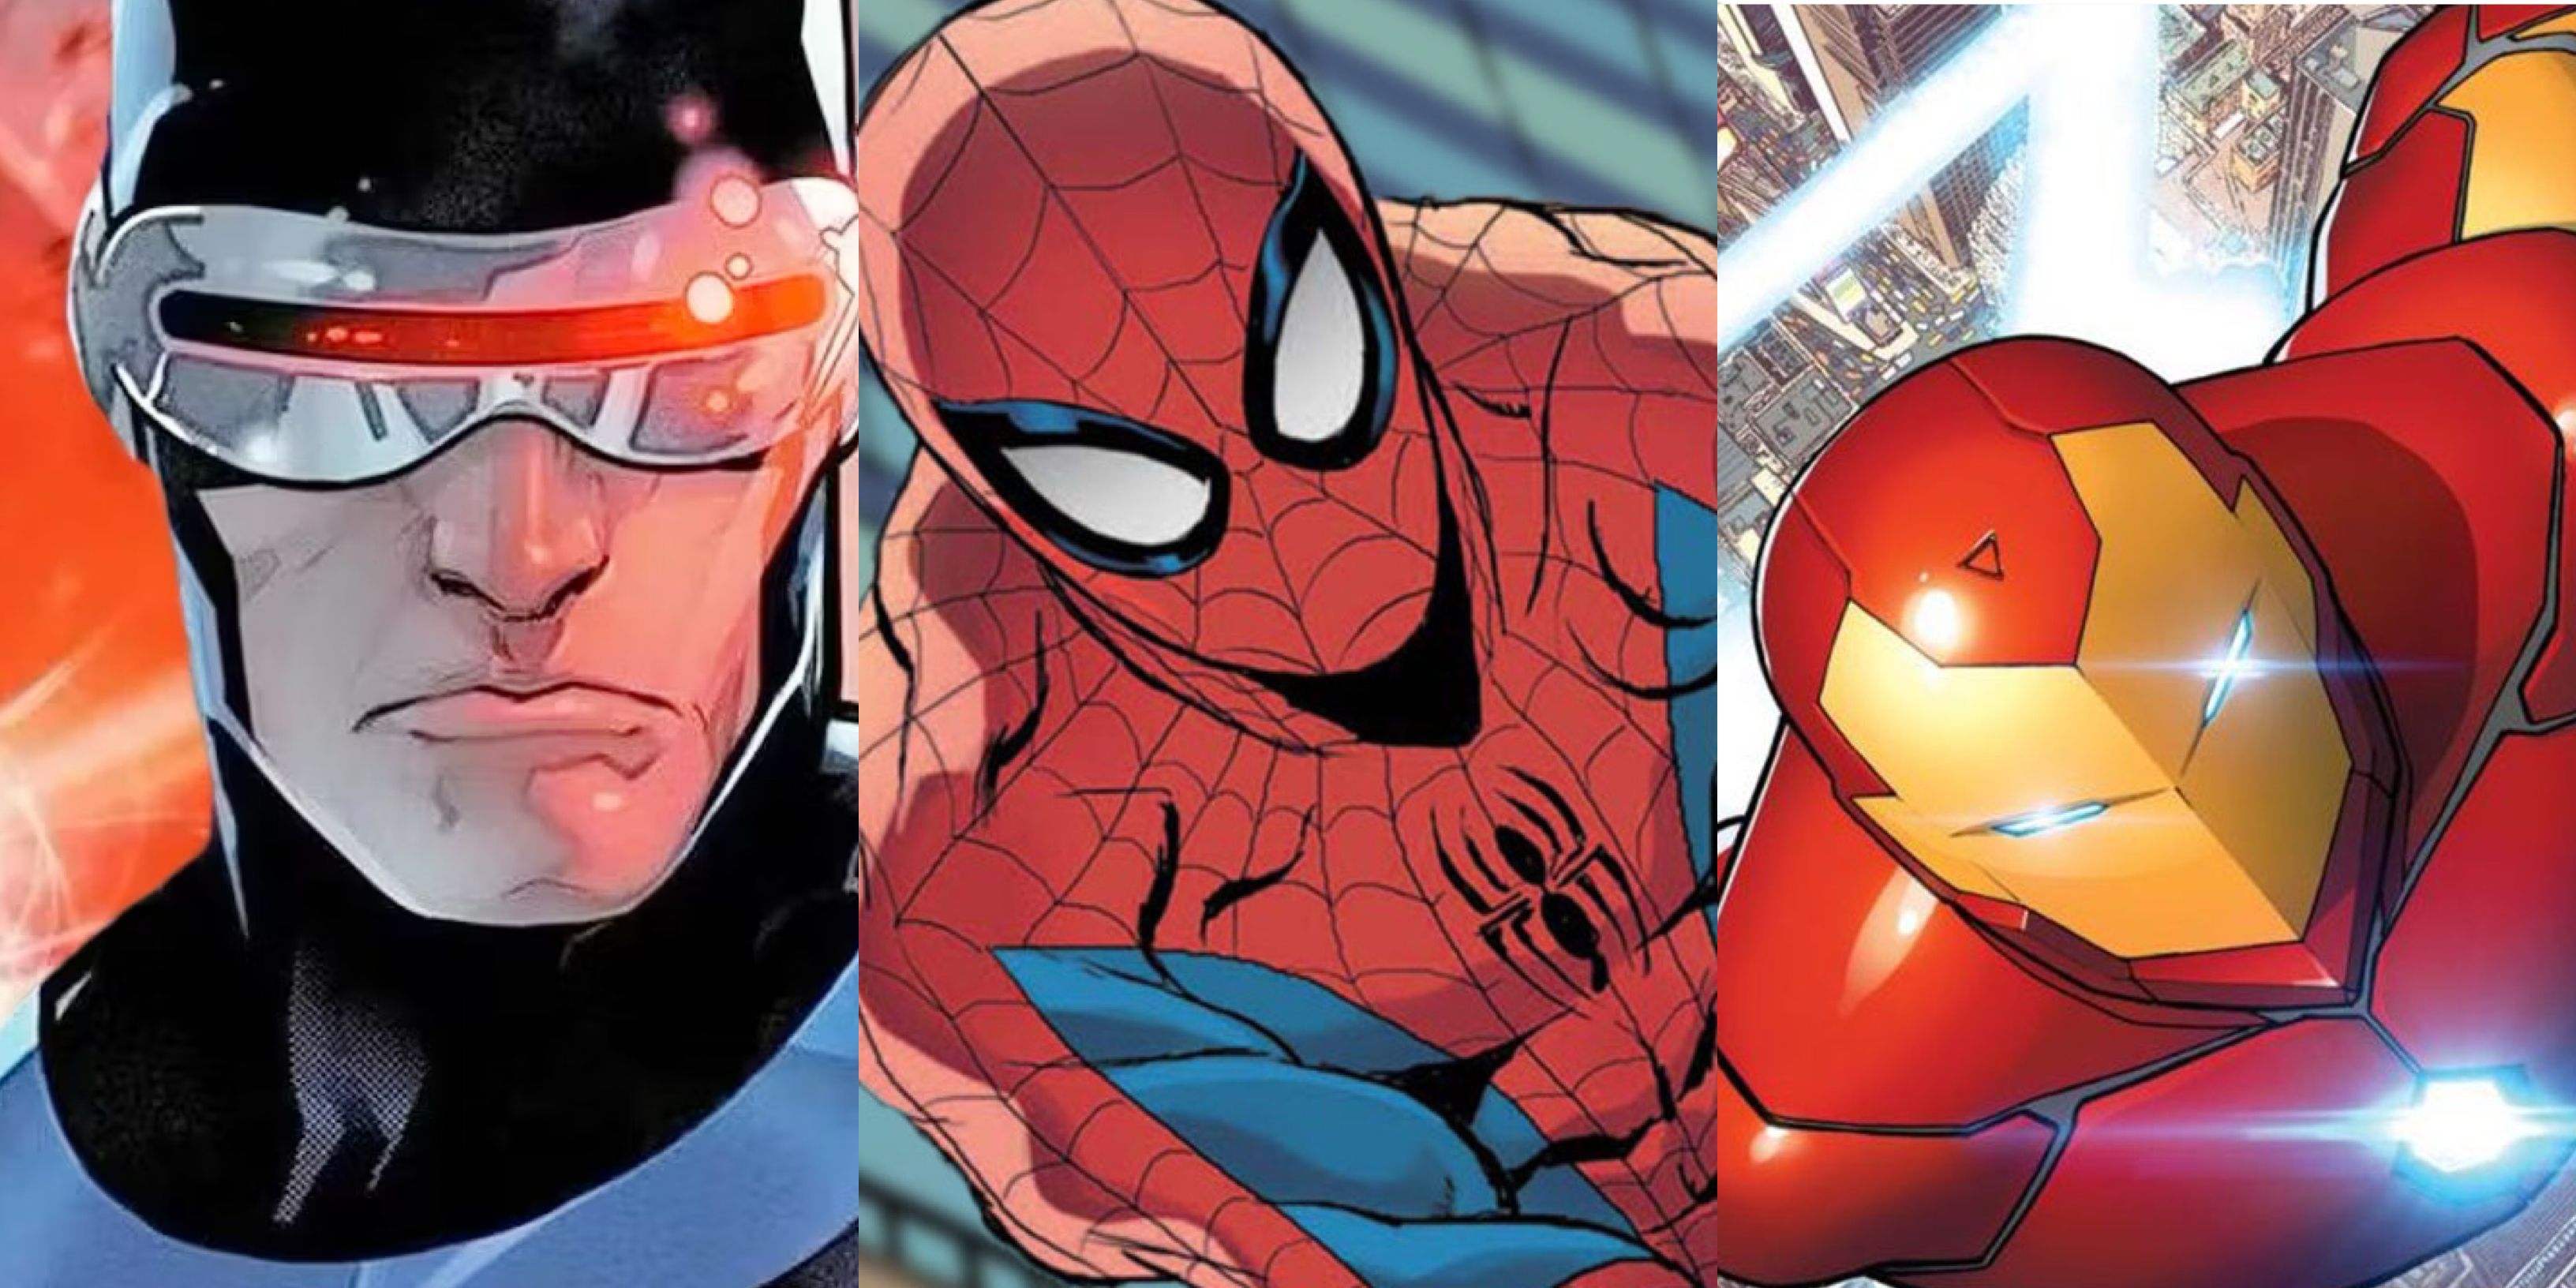 Heroes Who Hate Spider-Man: Cyclops (left), Spider-Man (middle), and Iron-Man (right)